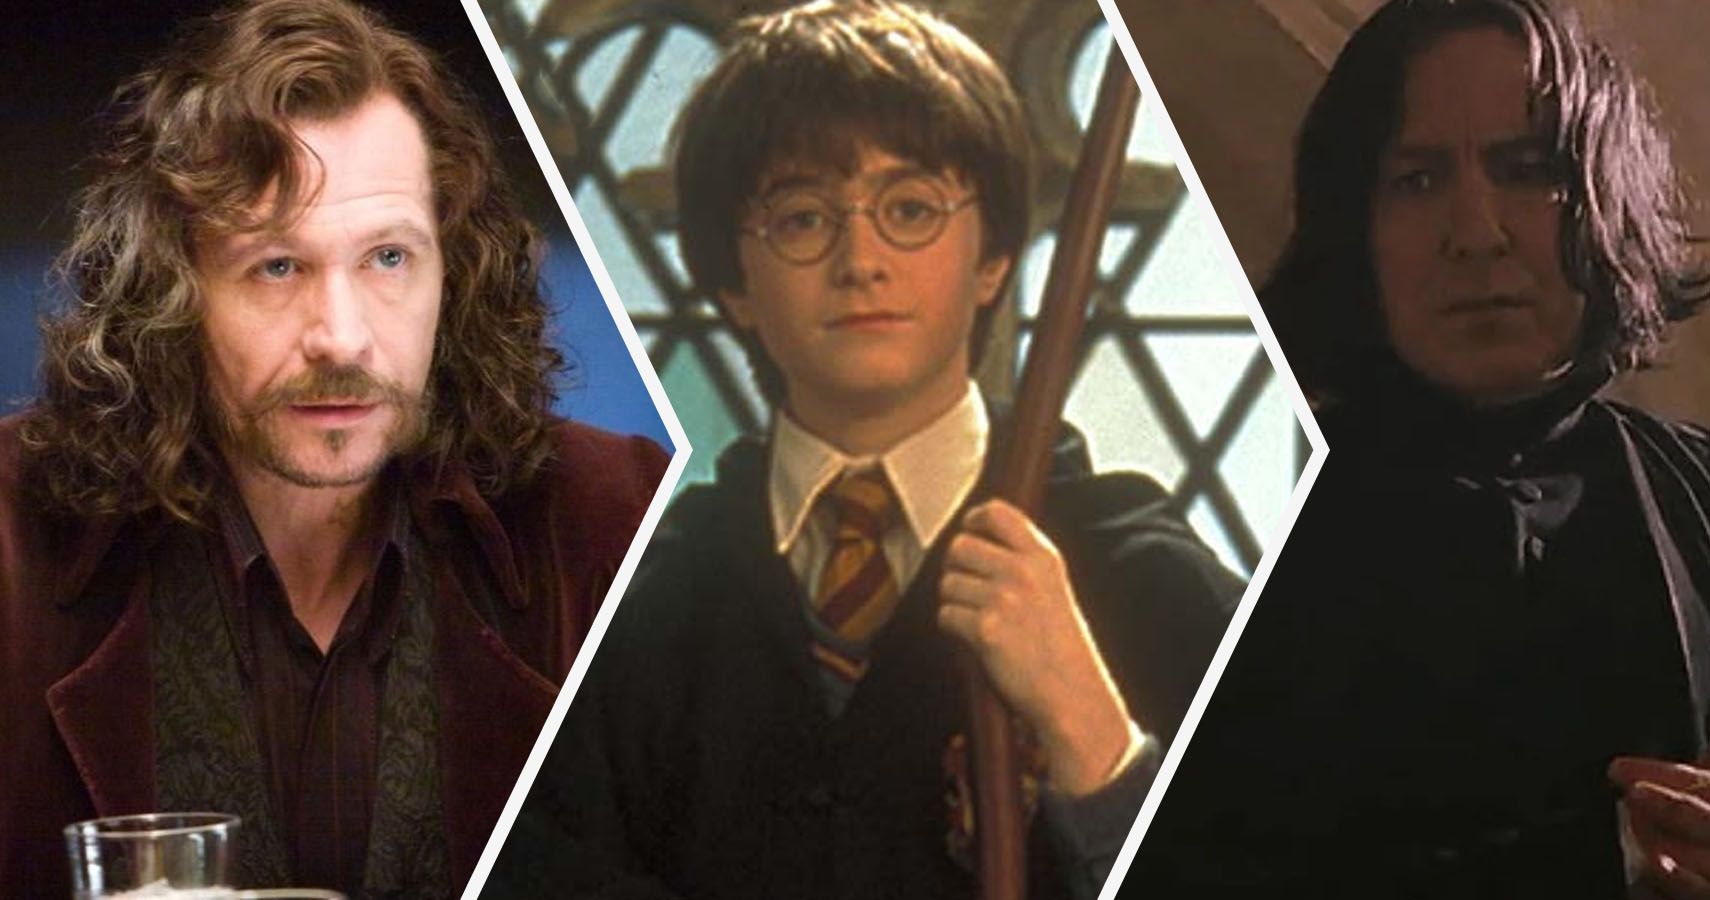 Who is the most resourceful male character in Harry Potter?